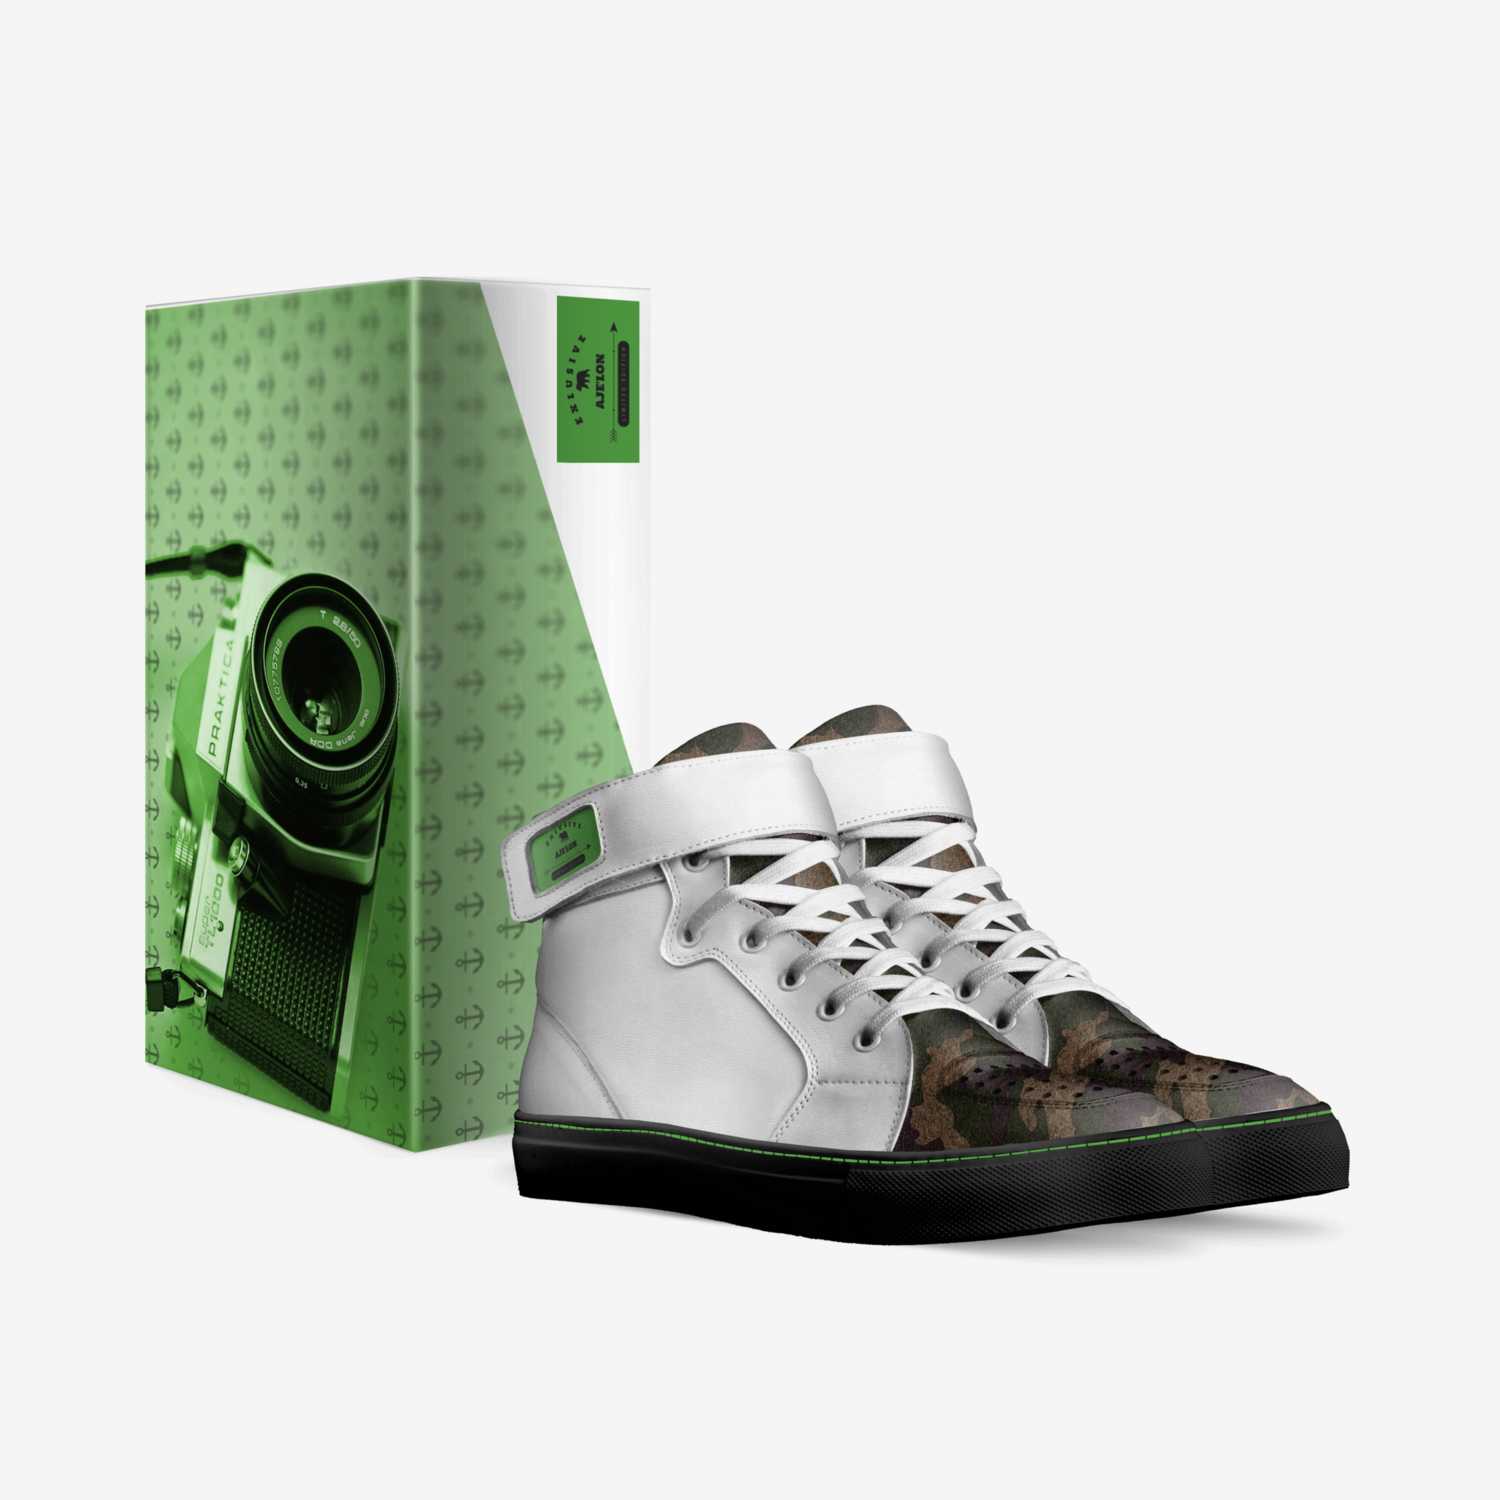 Aje'lon custom made in Italy shoes by Ajel'On Hill | Box view